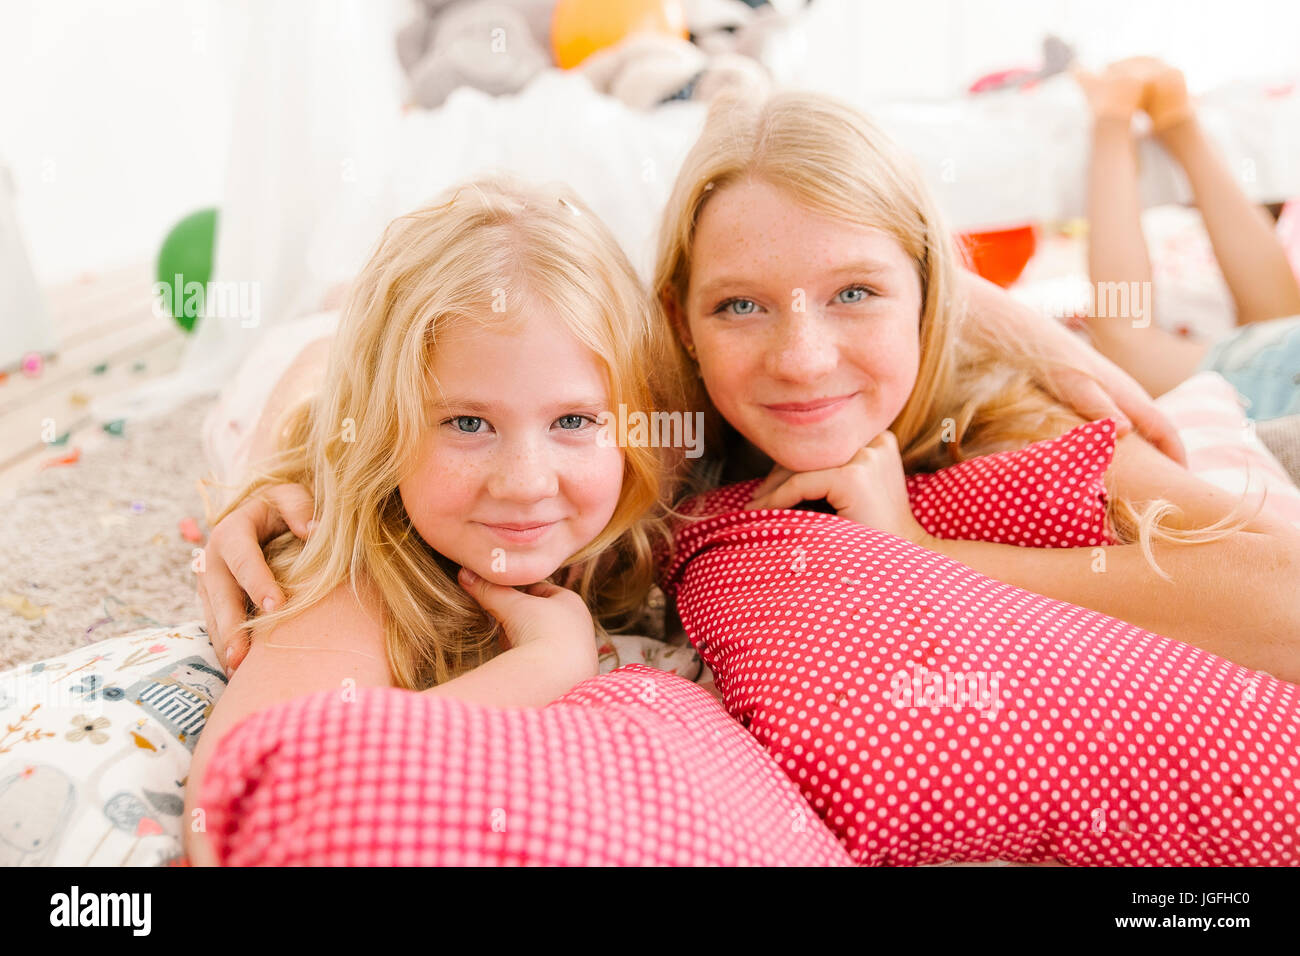 Portrait of smiling Middle Eastern sisters laying on floor Stock Photo